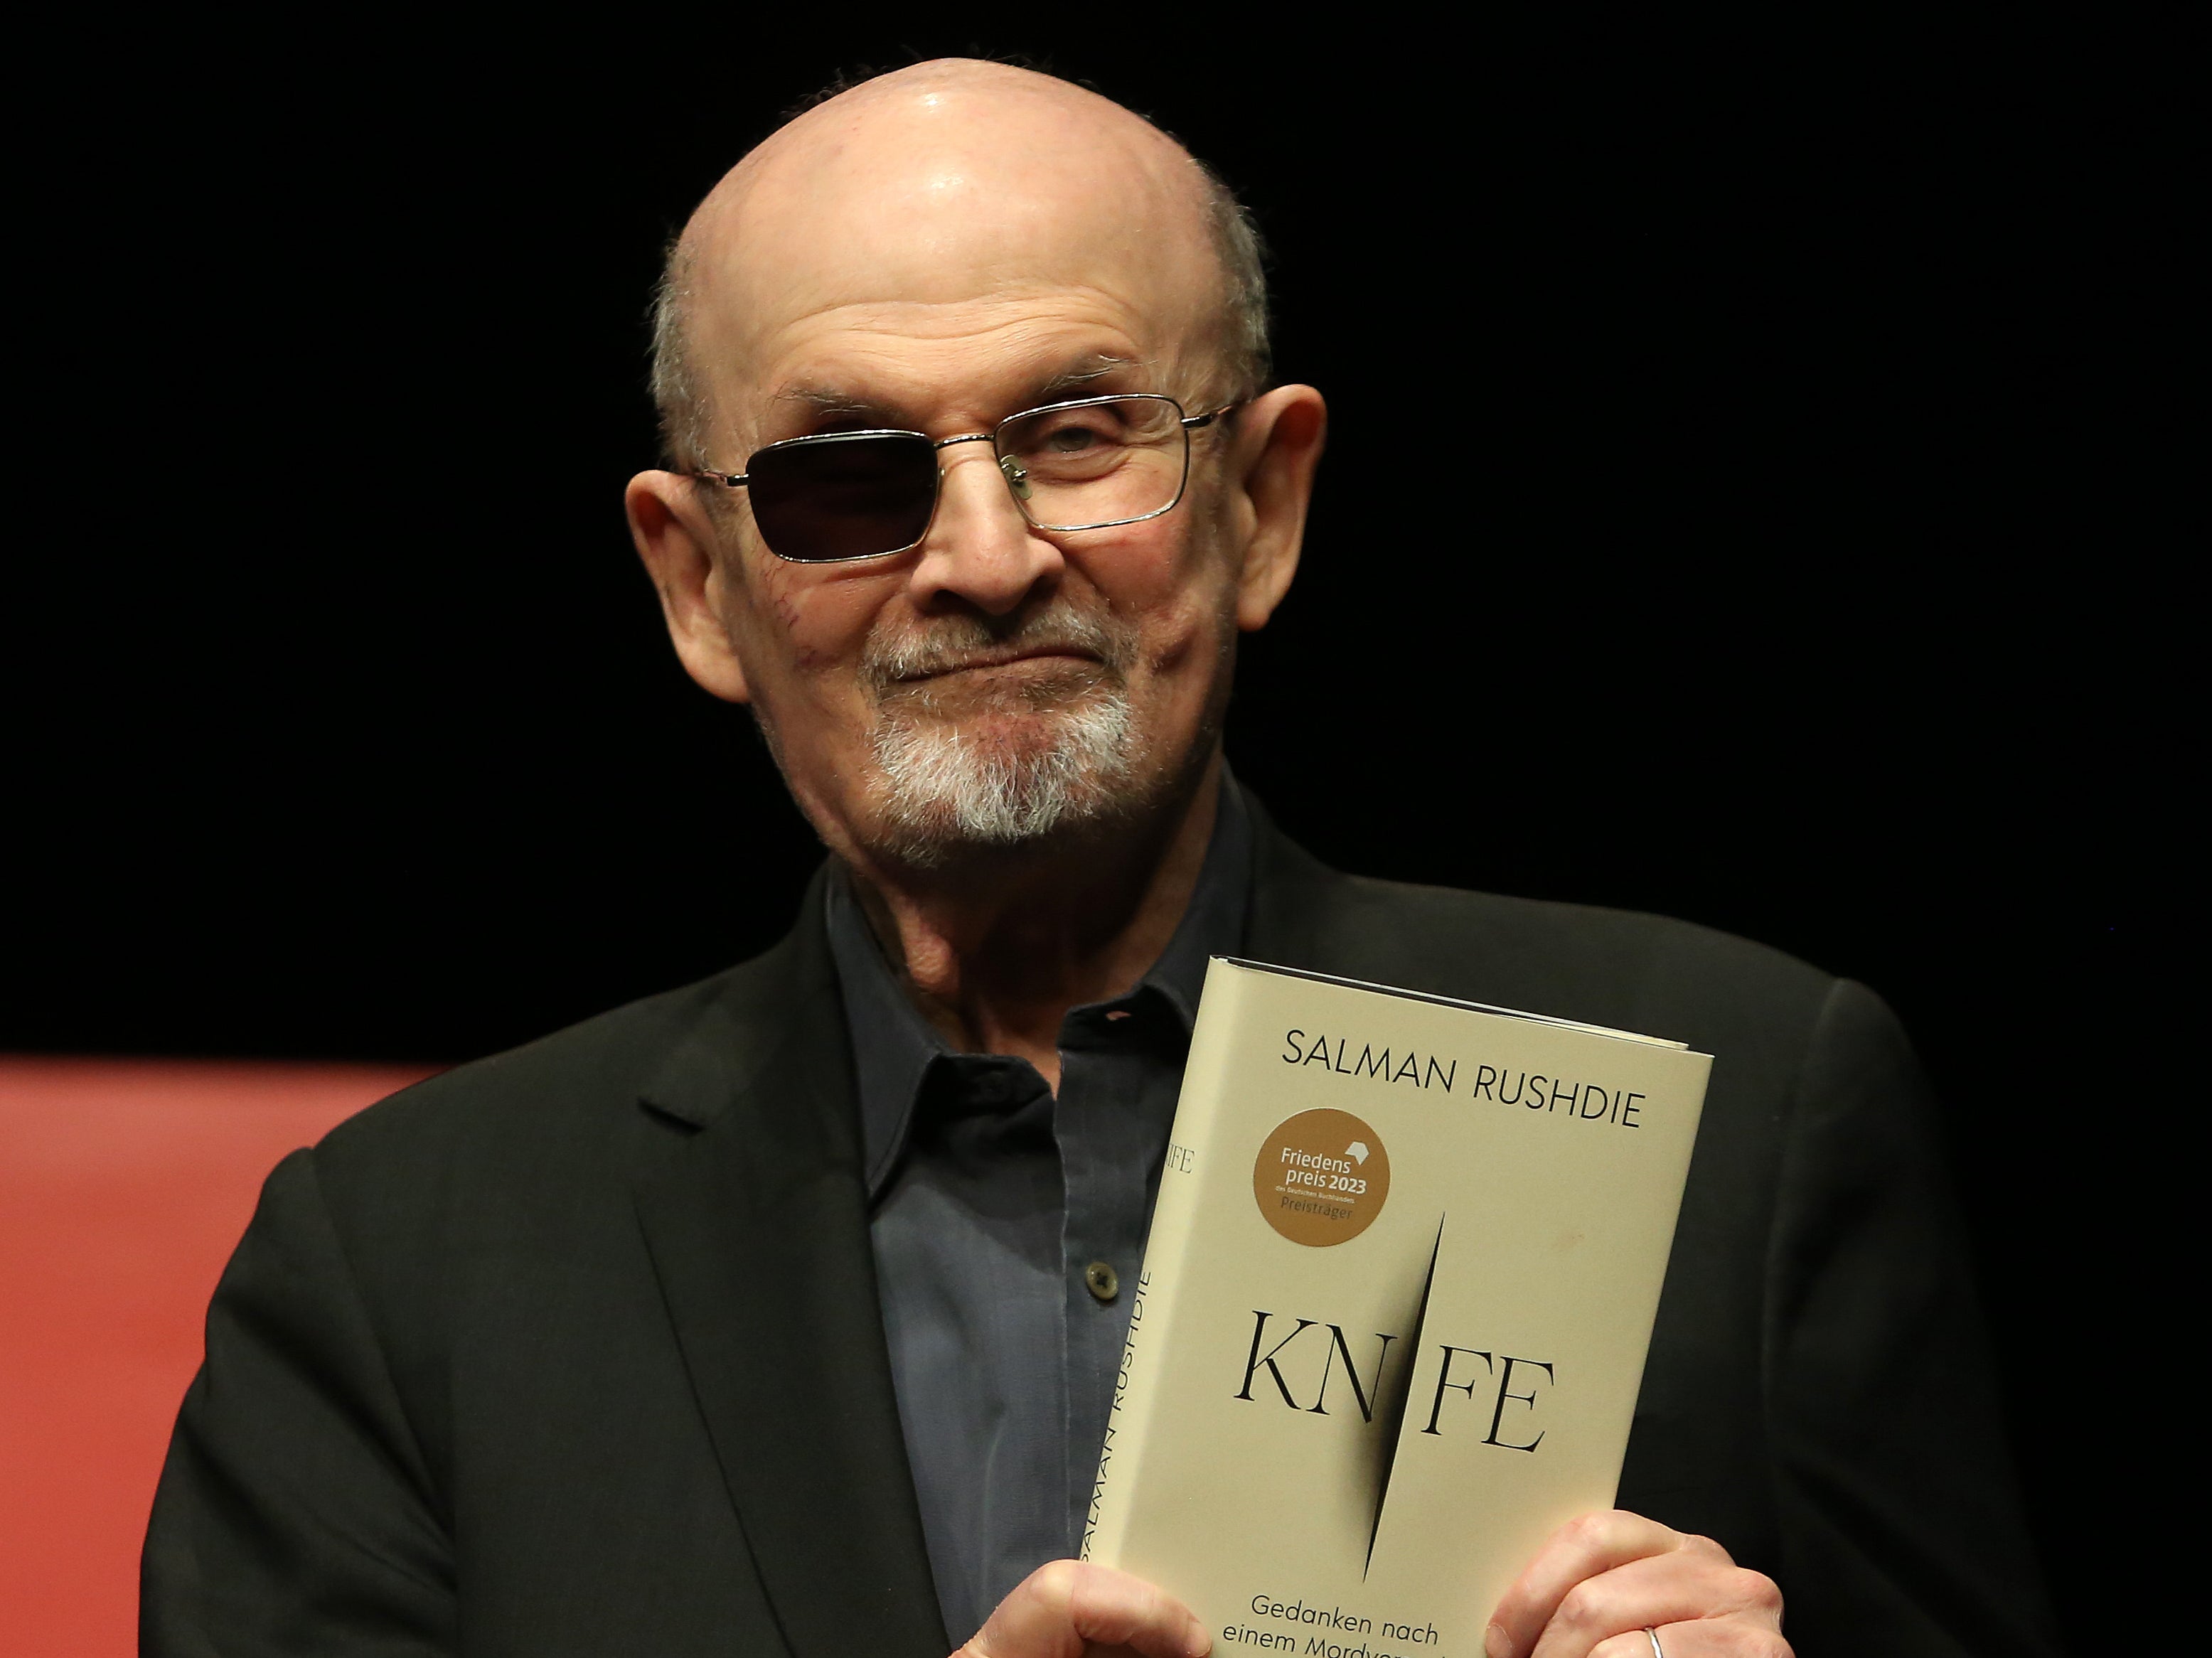 Salman Rushdie attends a presentation of his book ‘Knife: Meditations After an Attempted Murder’ at Deutsches Theater on May 16, 2024 in Berlin, Germany.